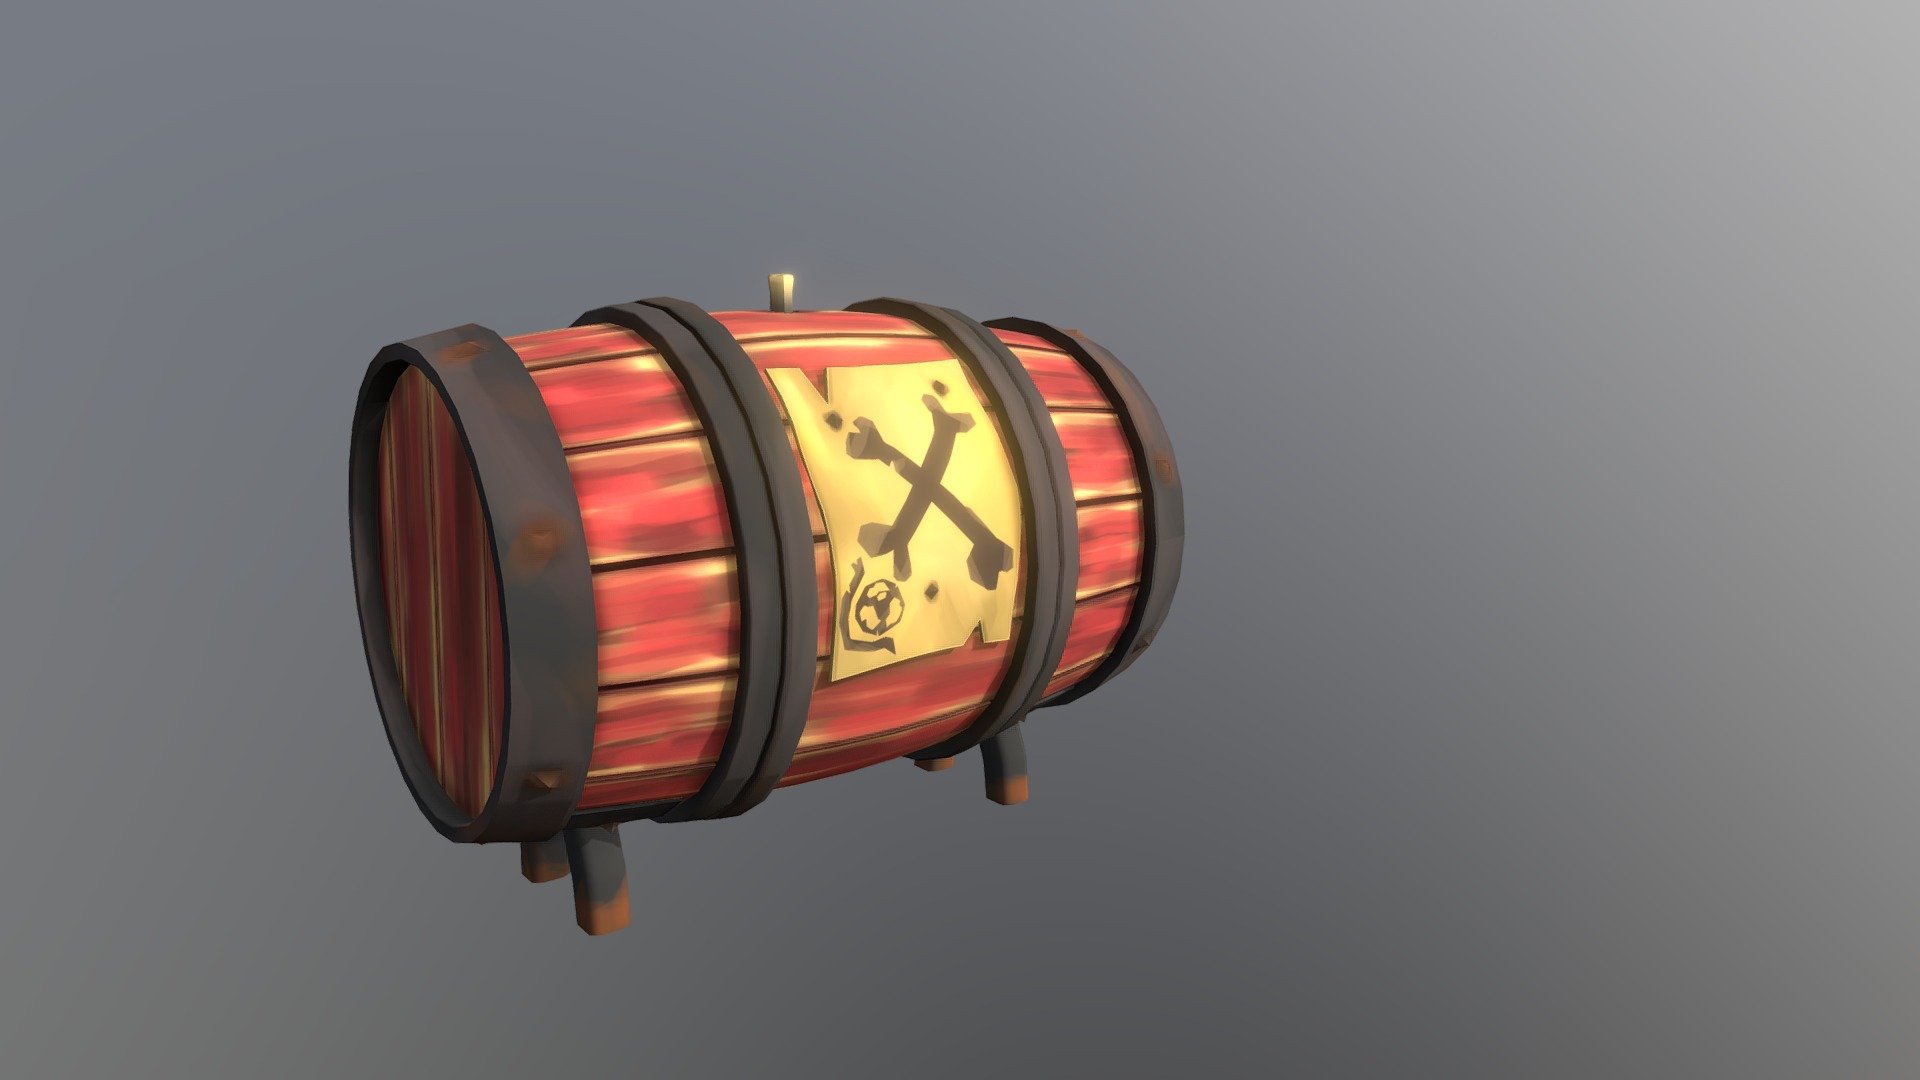 Gunpowder Barrel modeled for University masters at UCLAn, from the game Sea Of Thieves - Gunpowder Barrel (Sea Of Thieves Fan Art) - 3D model by Tom Waude (@tomwaude) 3d model